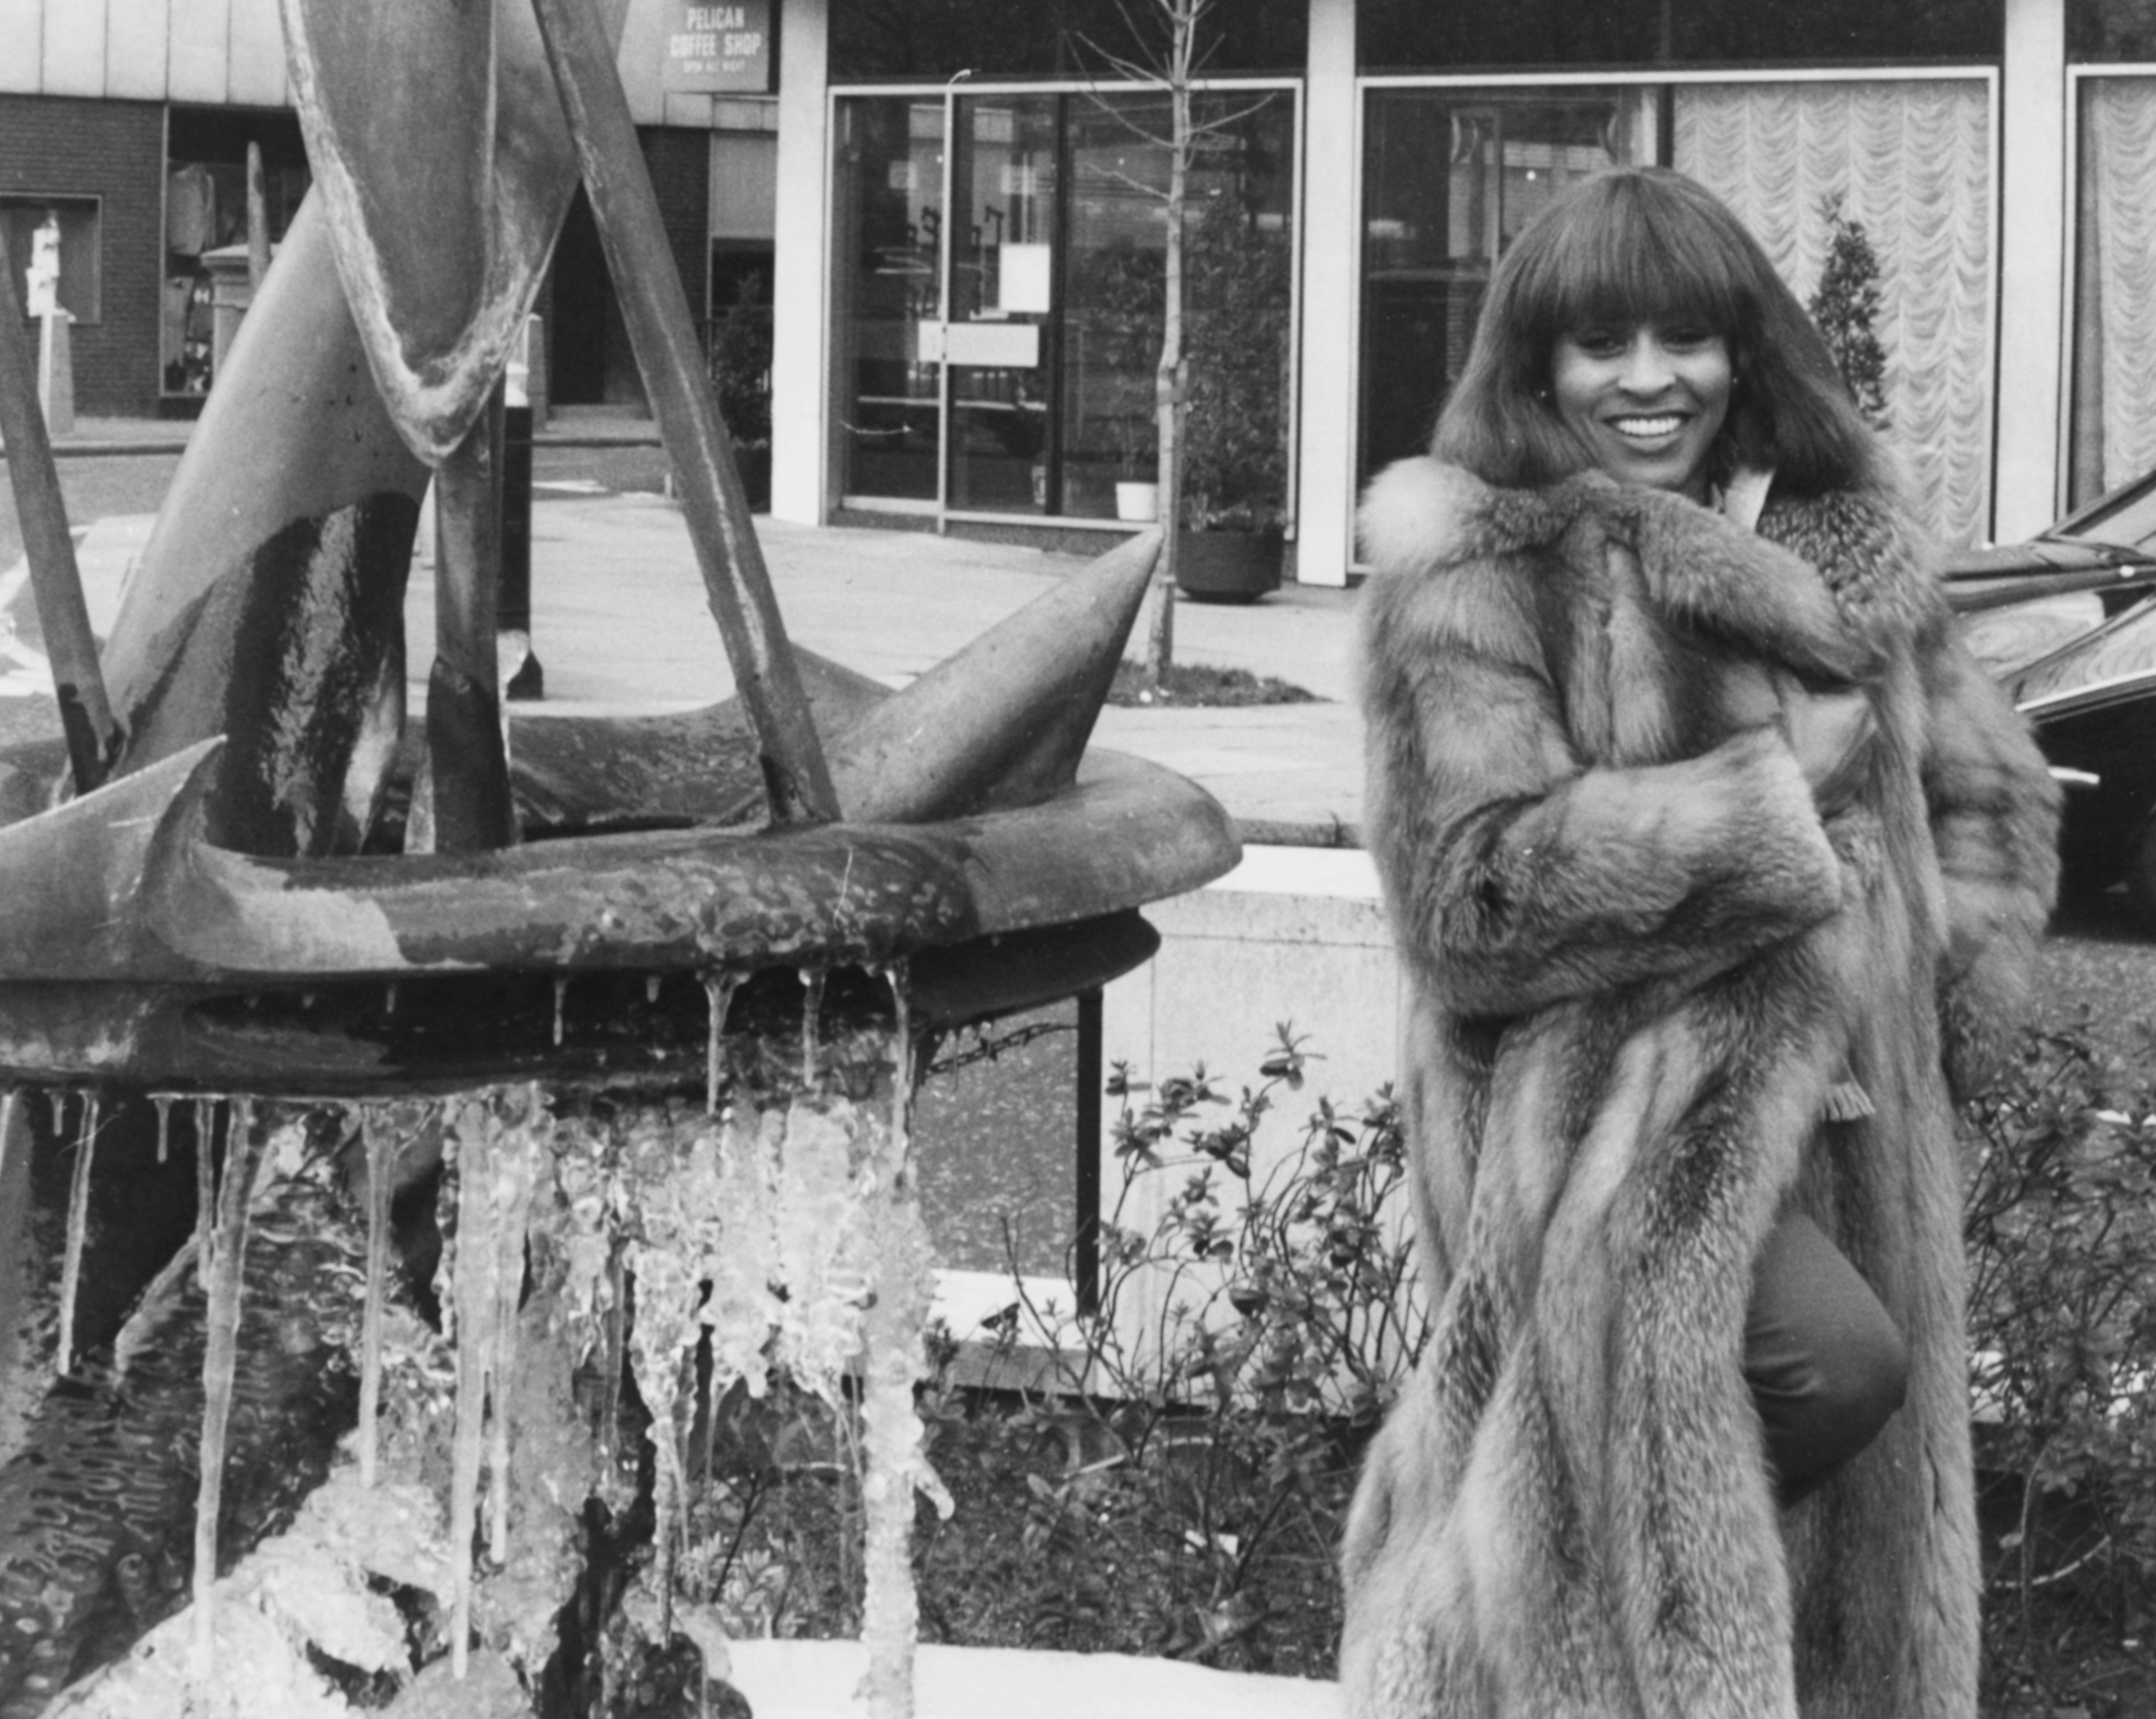 Singer Tina Turner wearing a fur coat as she poses next to a fountain in 1978